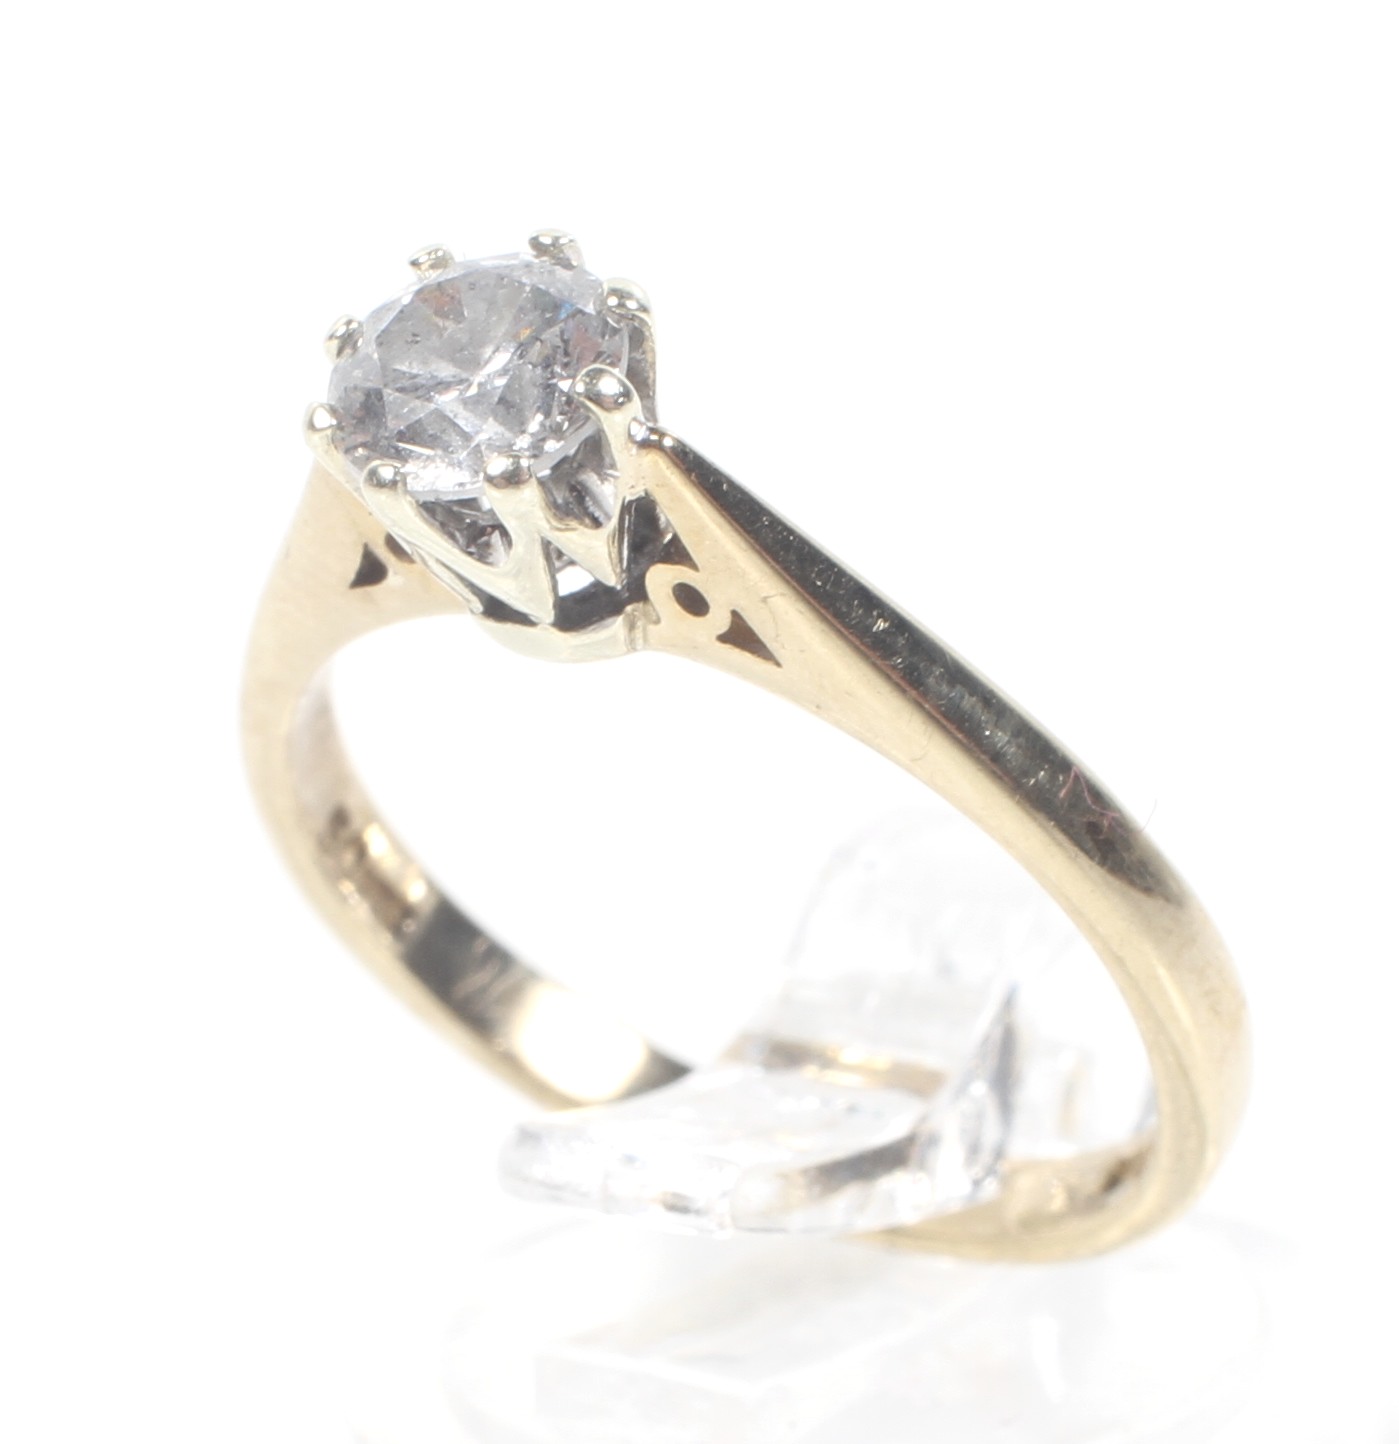 A vintage 9ct white and yellow gold and diamond solitaire ring. The round brilliant approx. 0.